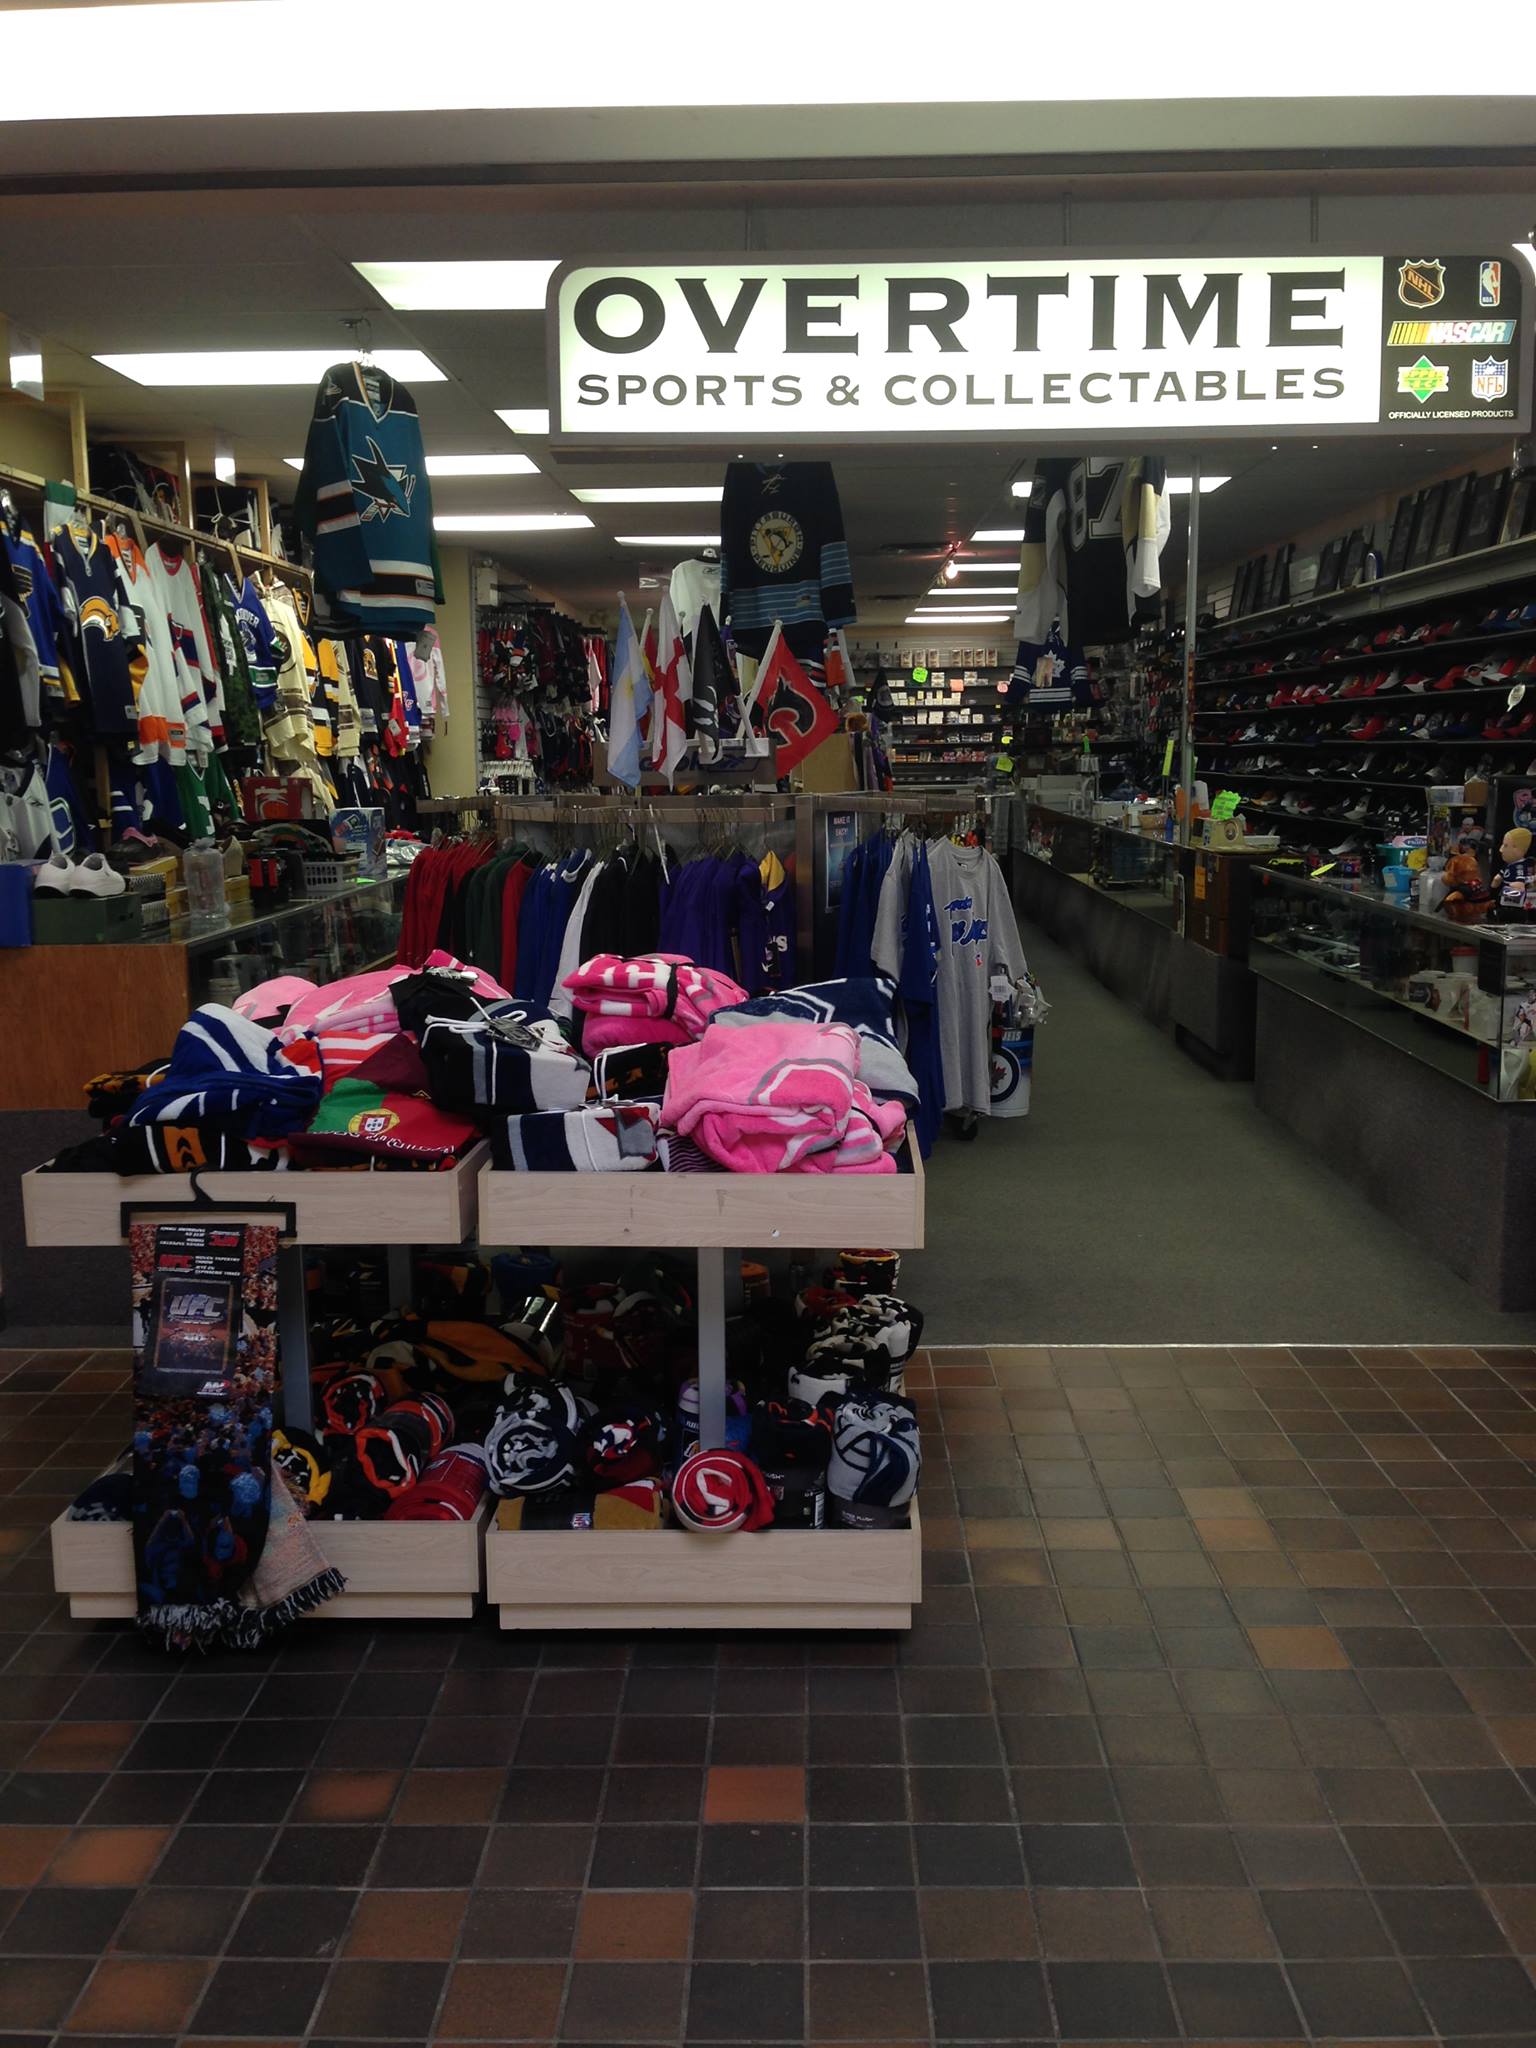 Overtime Sports & Collectables Inc